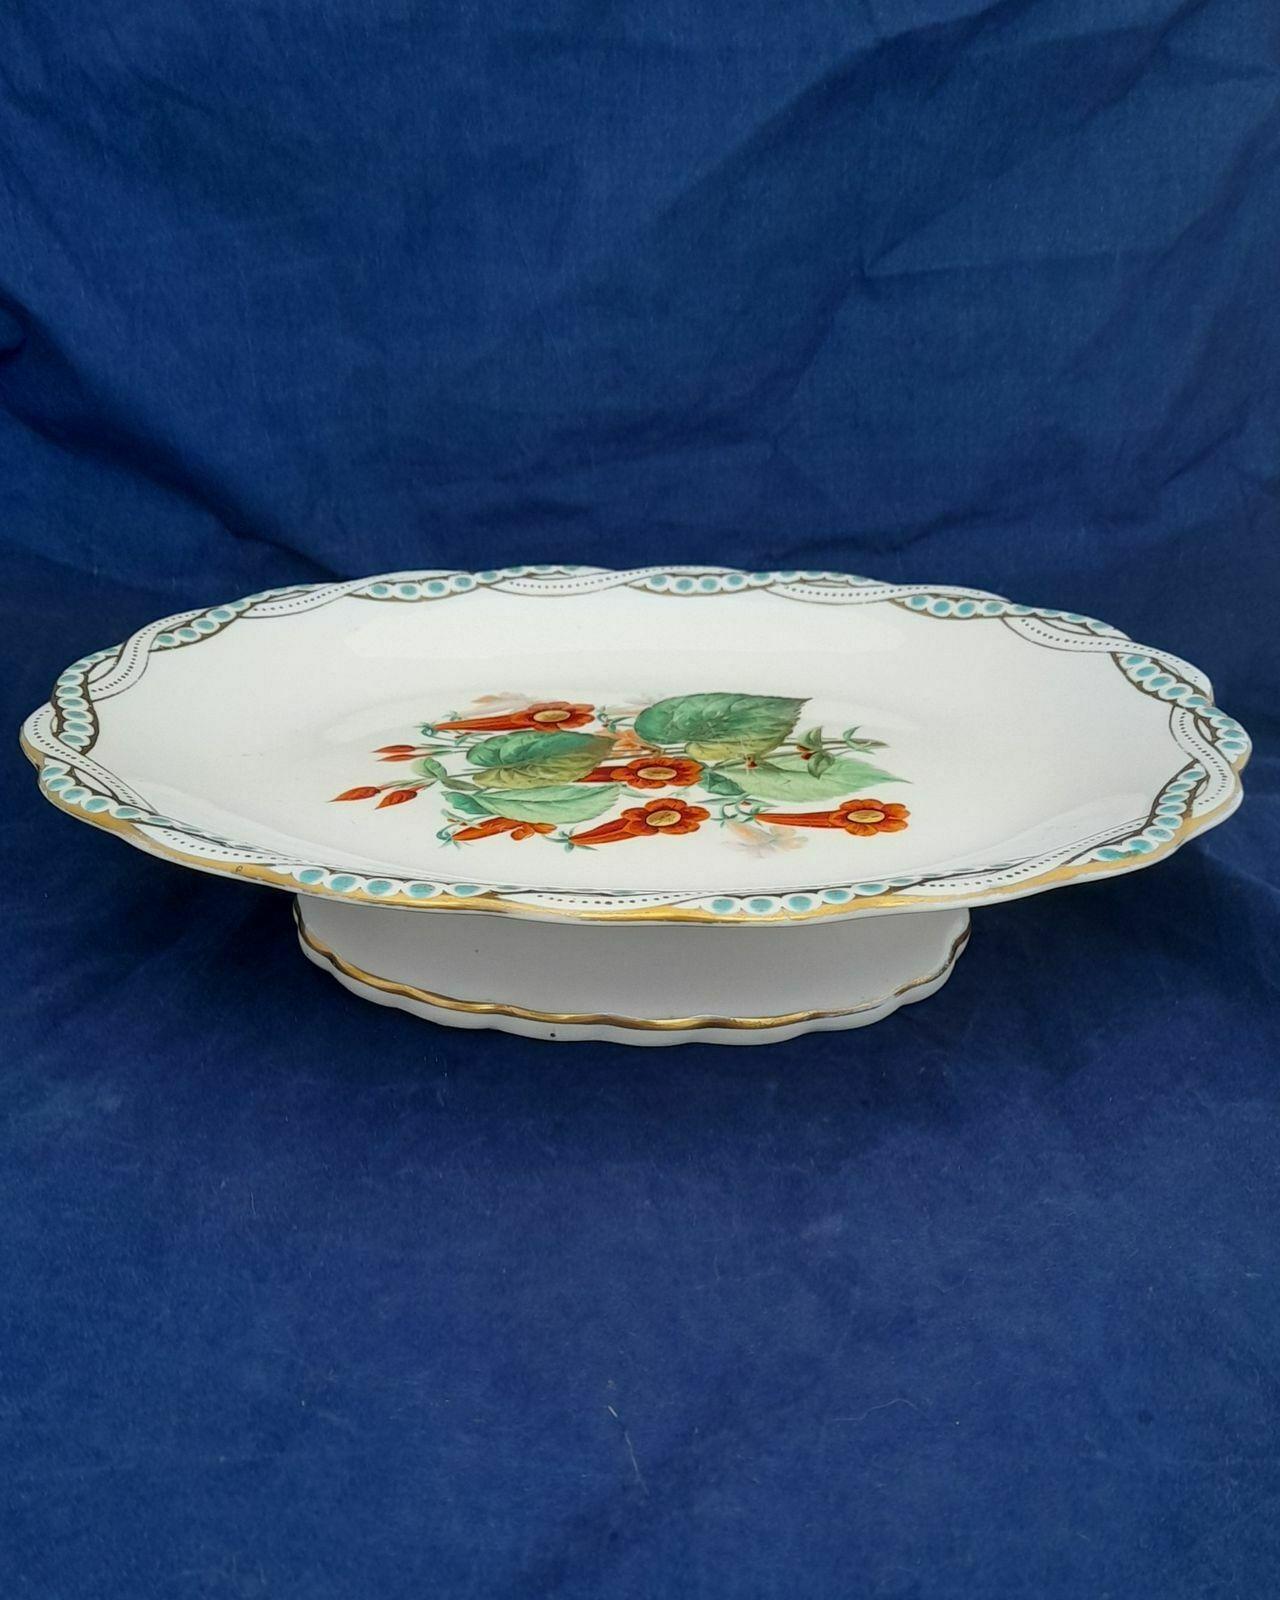 Antique 1840s Victorian Dessert Service Comport Compote Cake stand Probably Minton Argyle Pattern Hand Painted Campanula Flowers